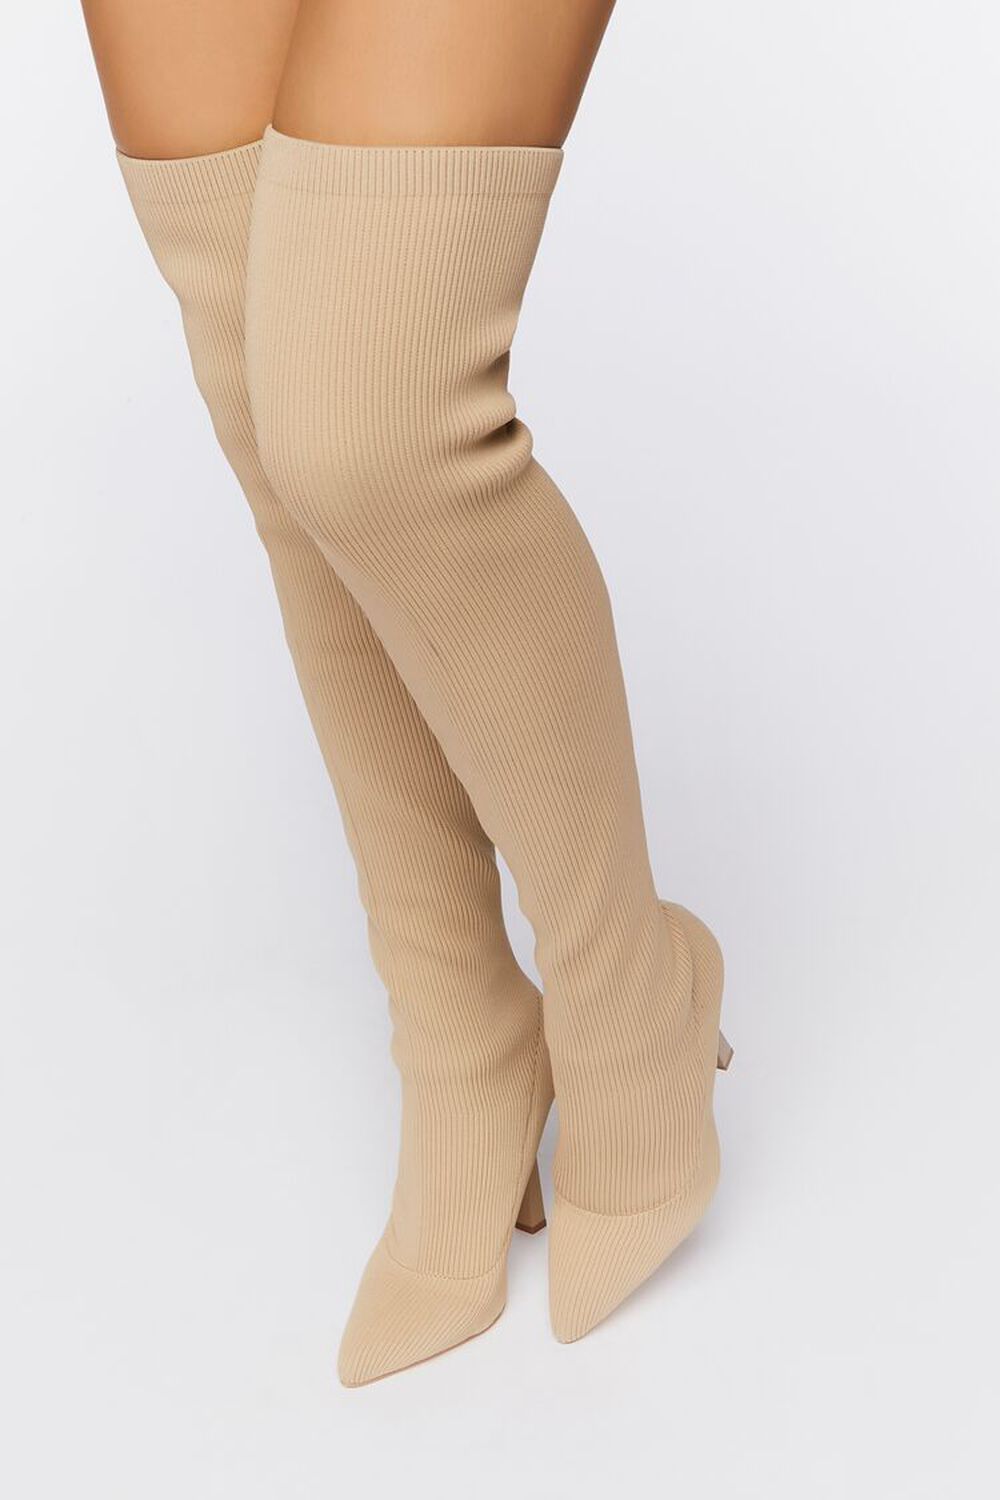 CREAM Over-the-Knee Sock Boots, image 1